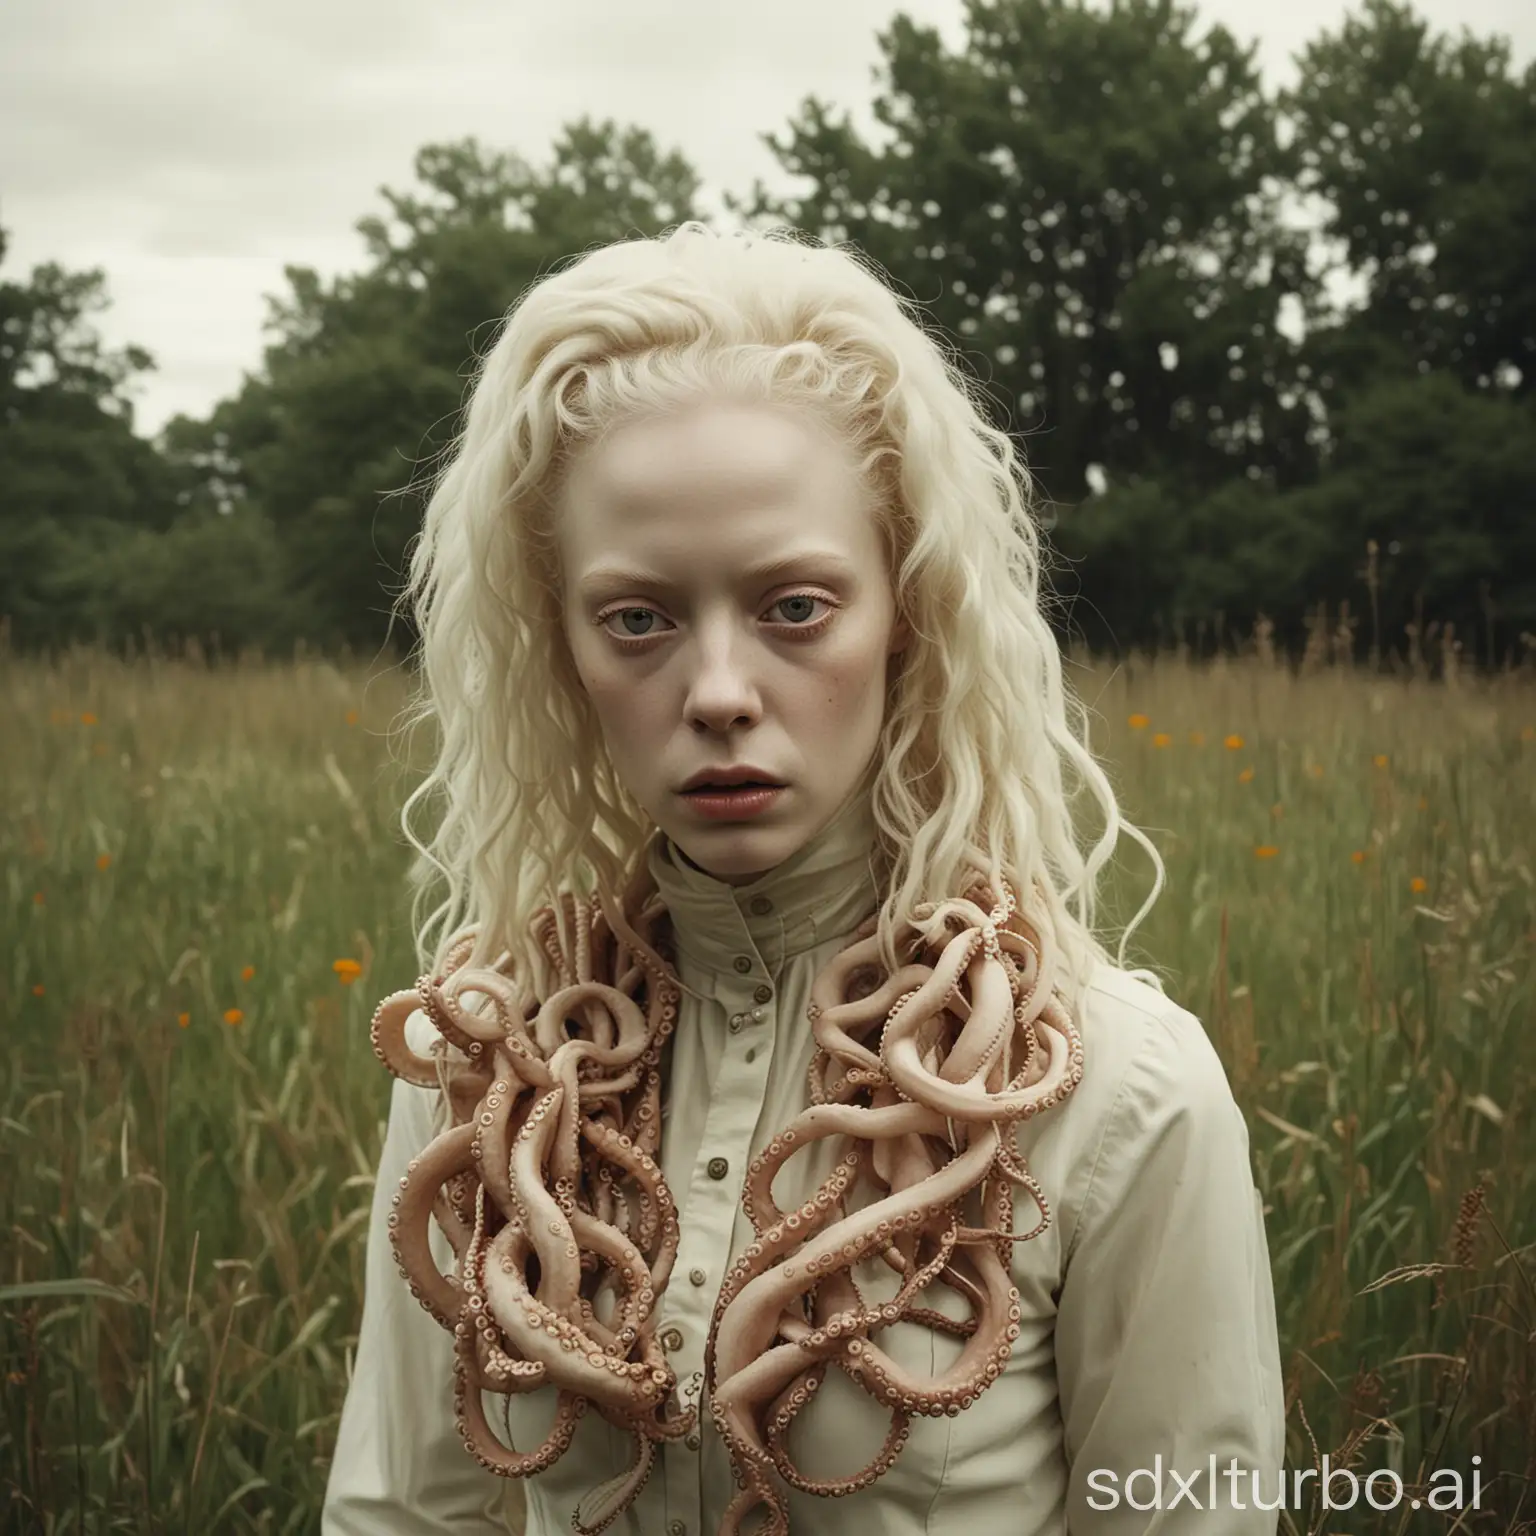 Portrait photography, early 1970's esthetics, sinister menacing albino female, octopus head, vintage clothes, in meadow, unsettling environment, color palette dominated by muted, earthy tone, experimental horror film style, adds an intriguing and otherworldly element, natural light, stressful environment, nature photography, cinematic film rendering, full grained image evokes sense of yesteryear, heavy grained filter, RAW style